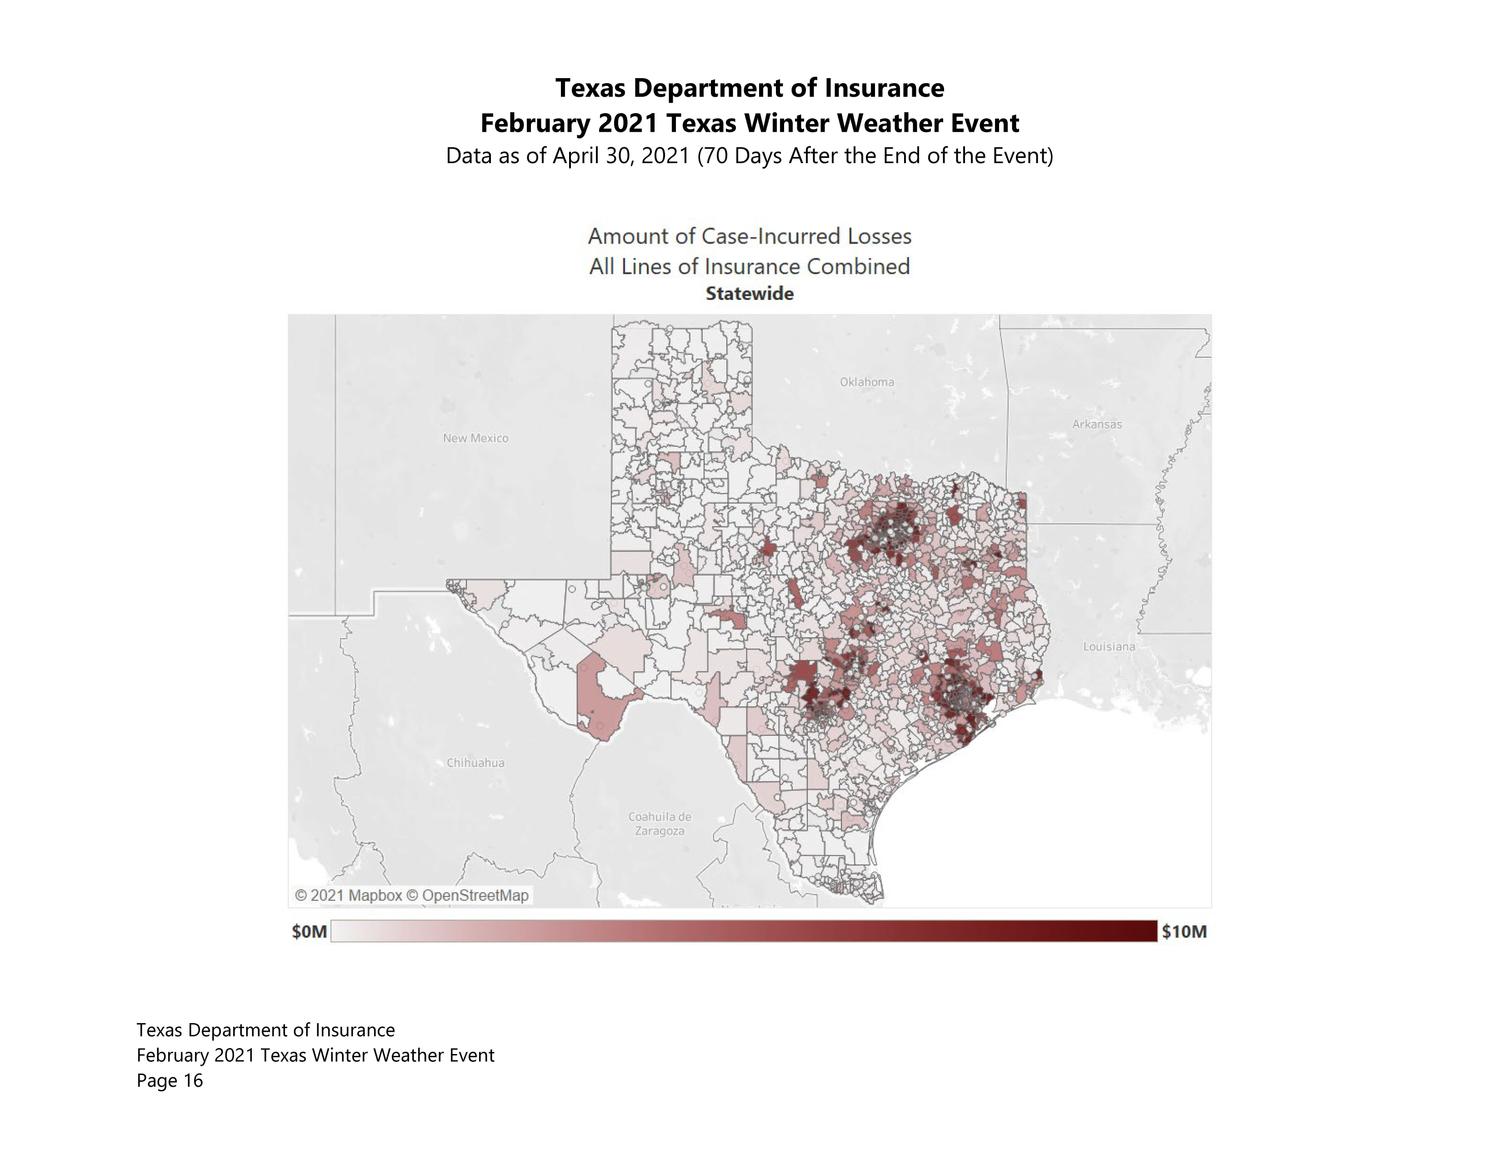 Insured Losses Resulting from the February 2021 Texas Winter Weather Event: April 2021
                                                
                                                    16
                                                